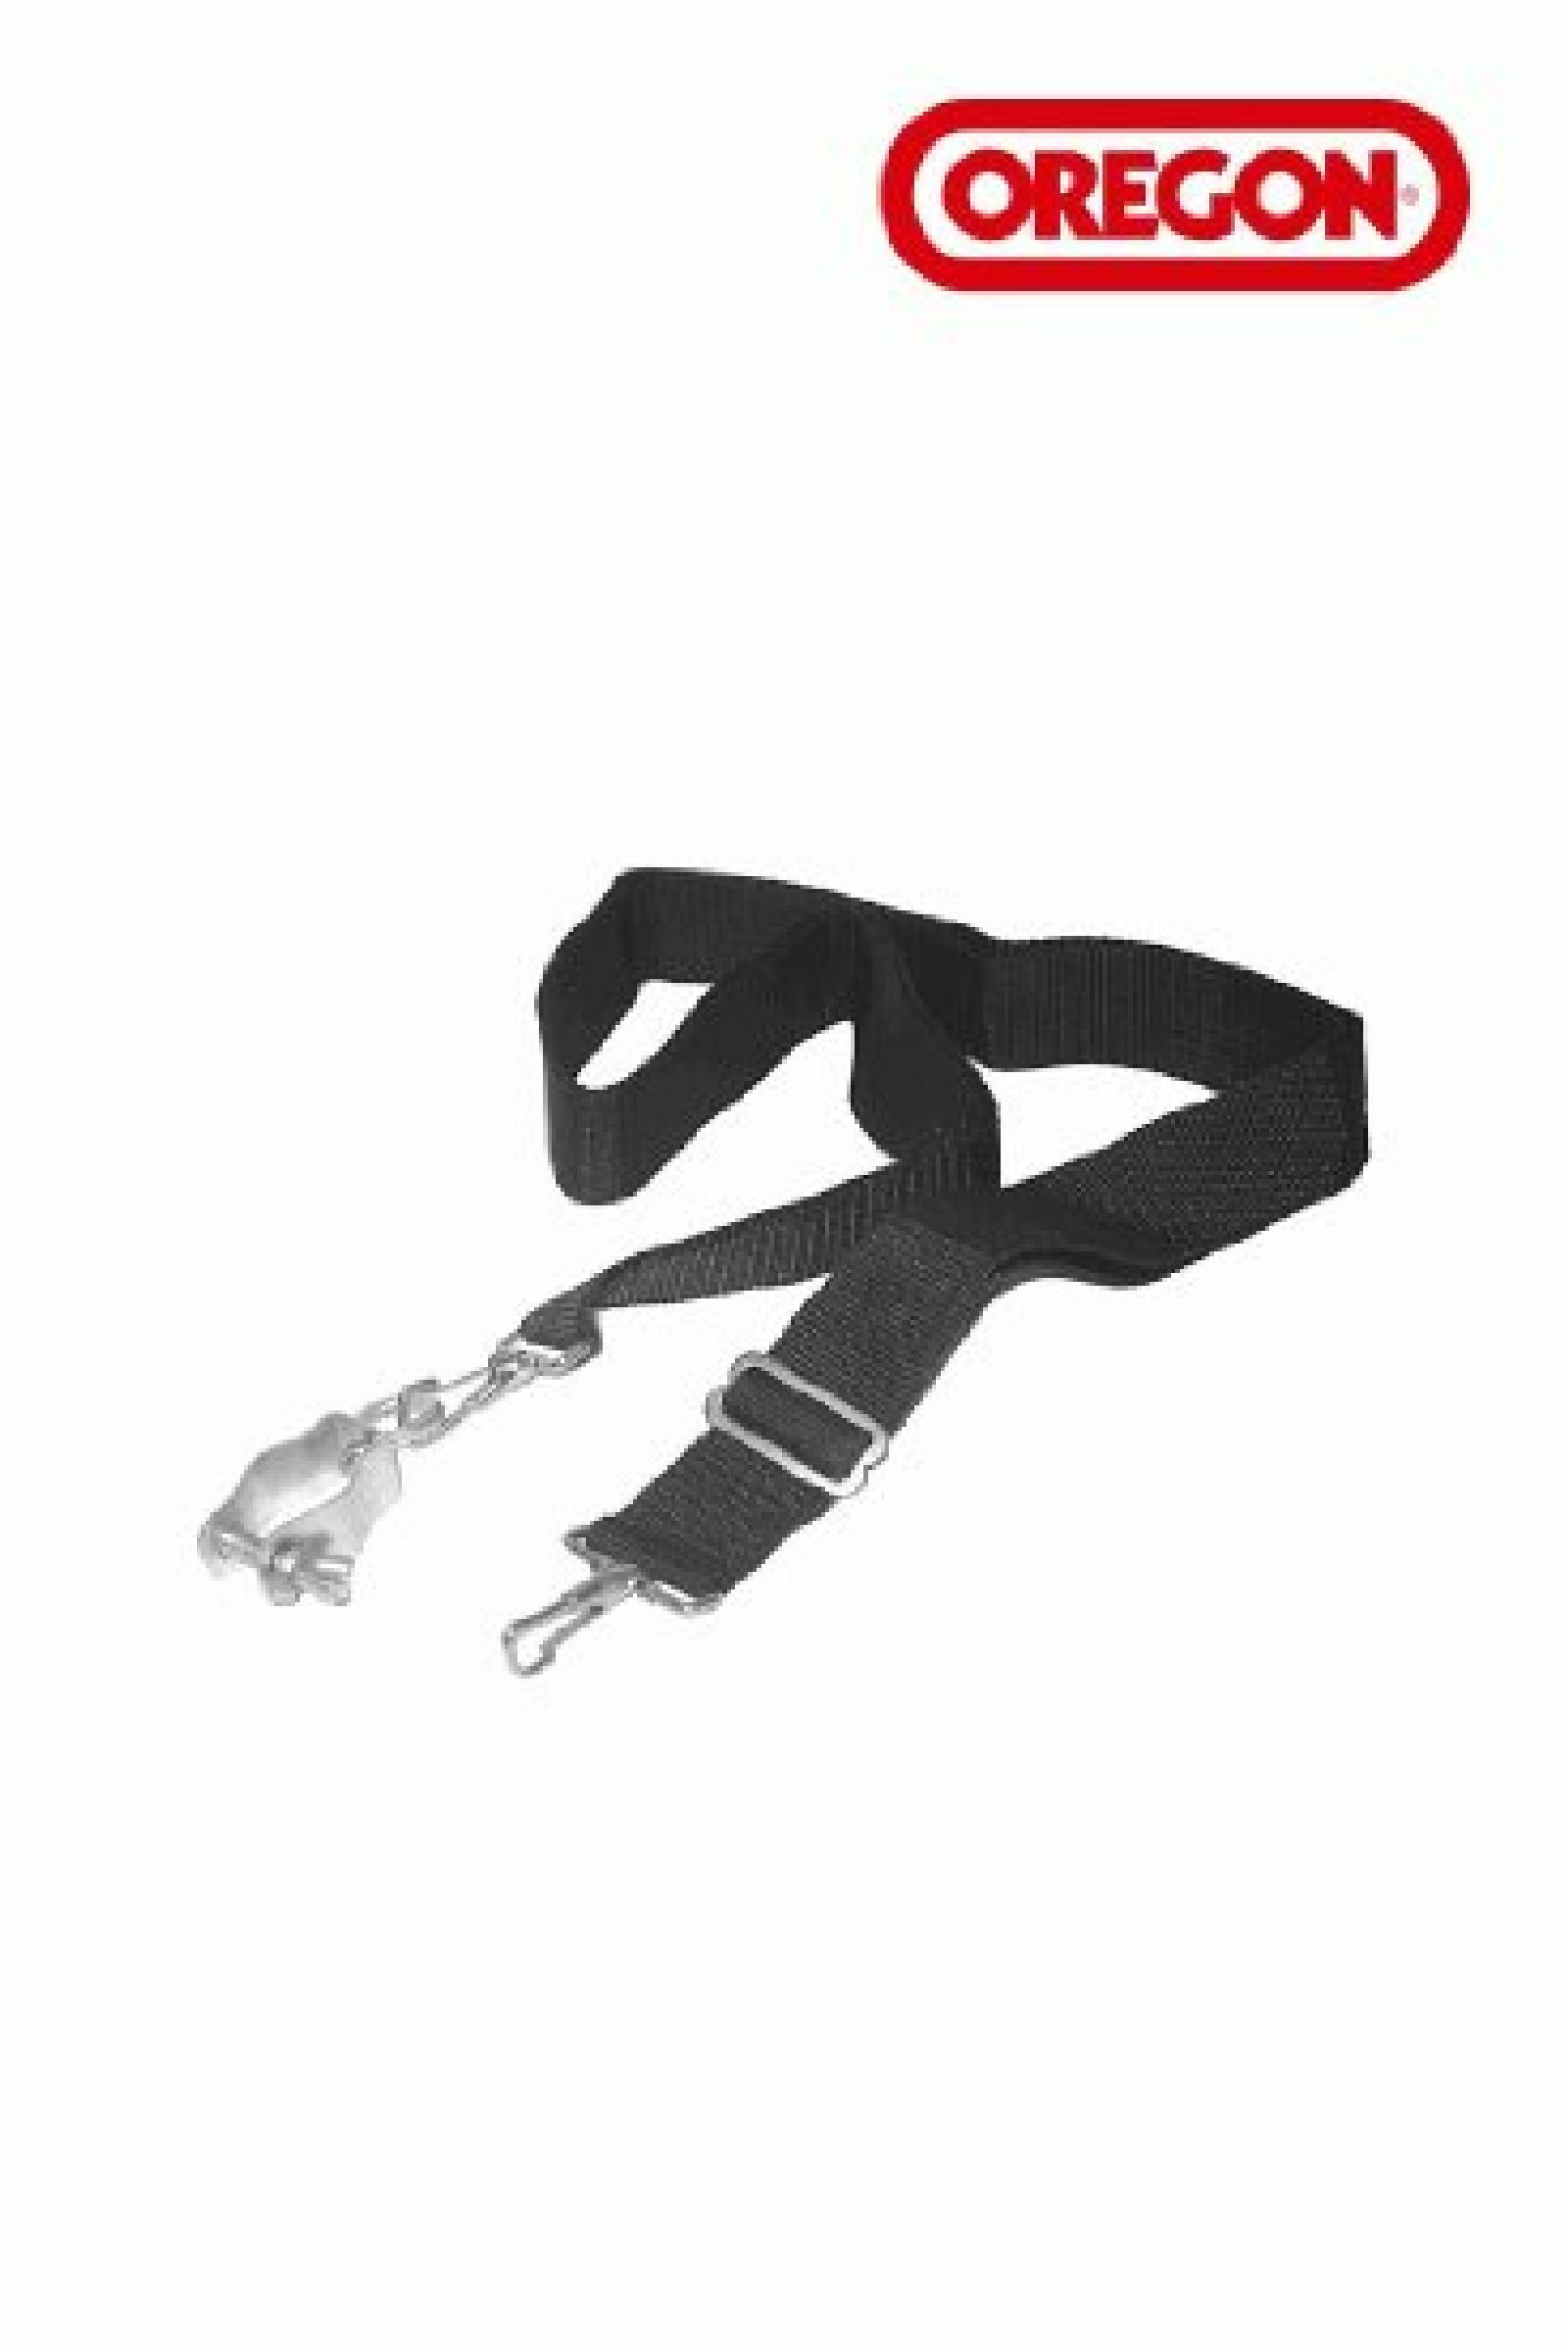 ADJUSTABLE TRIMMER STRAP part# 55-185 by Oregon - Click Image to Close